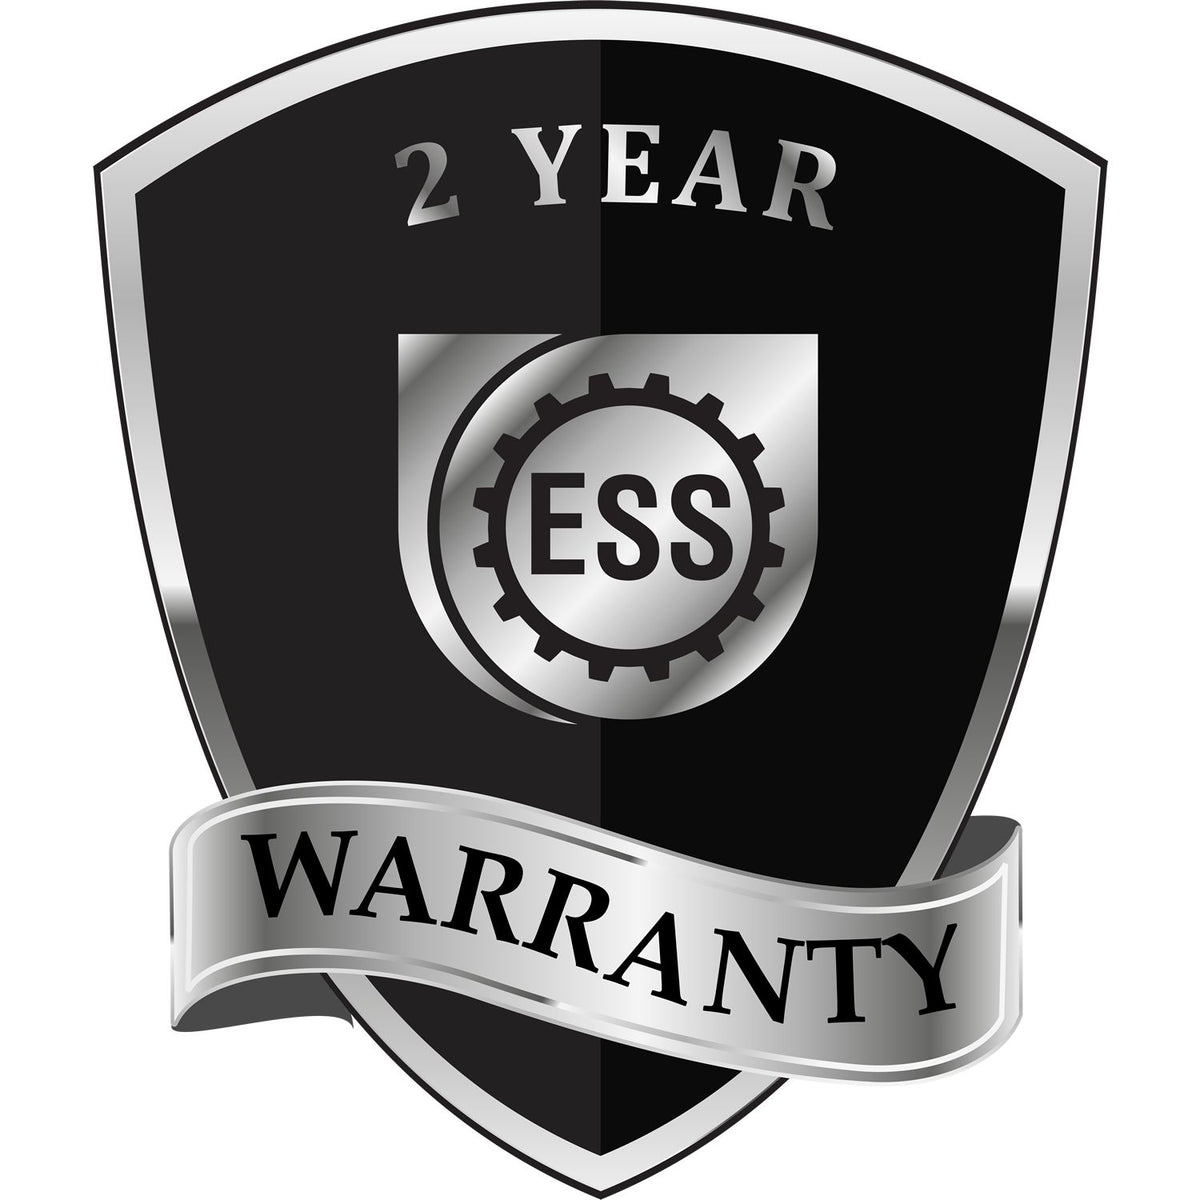 A badge or emblem showing a warranty icon for the Soft Guam Professional Engineer Seal